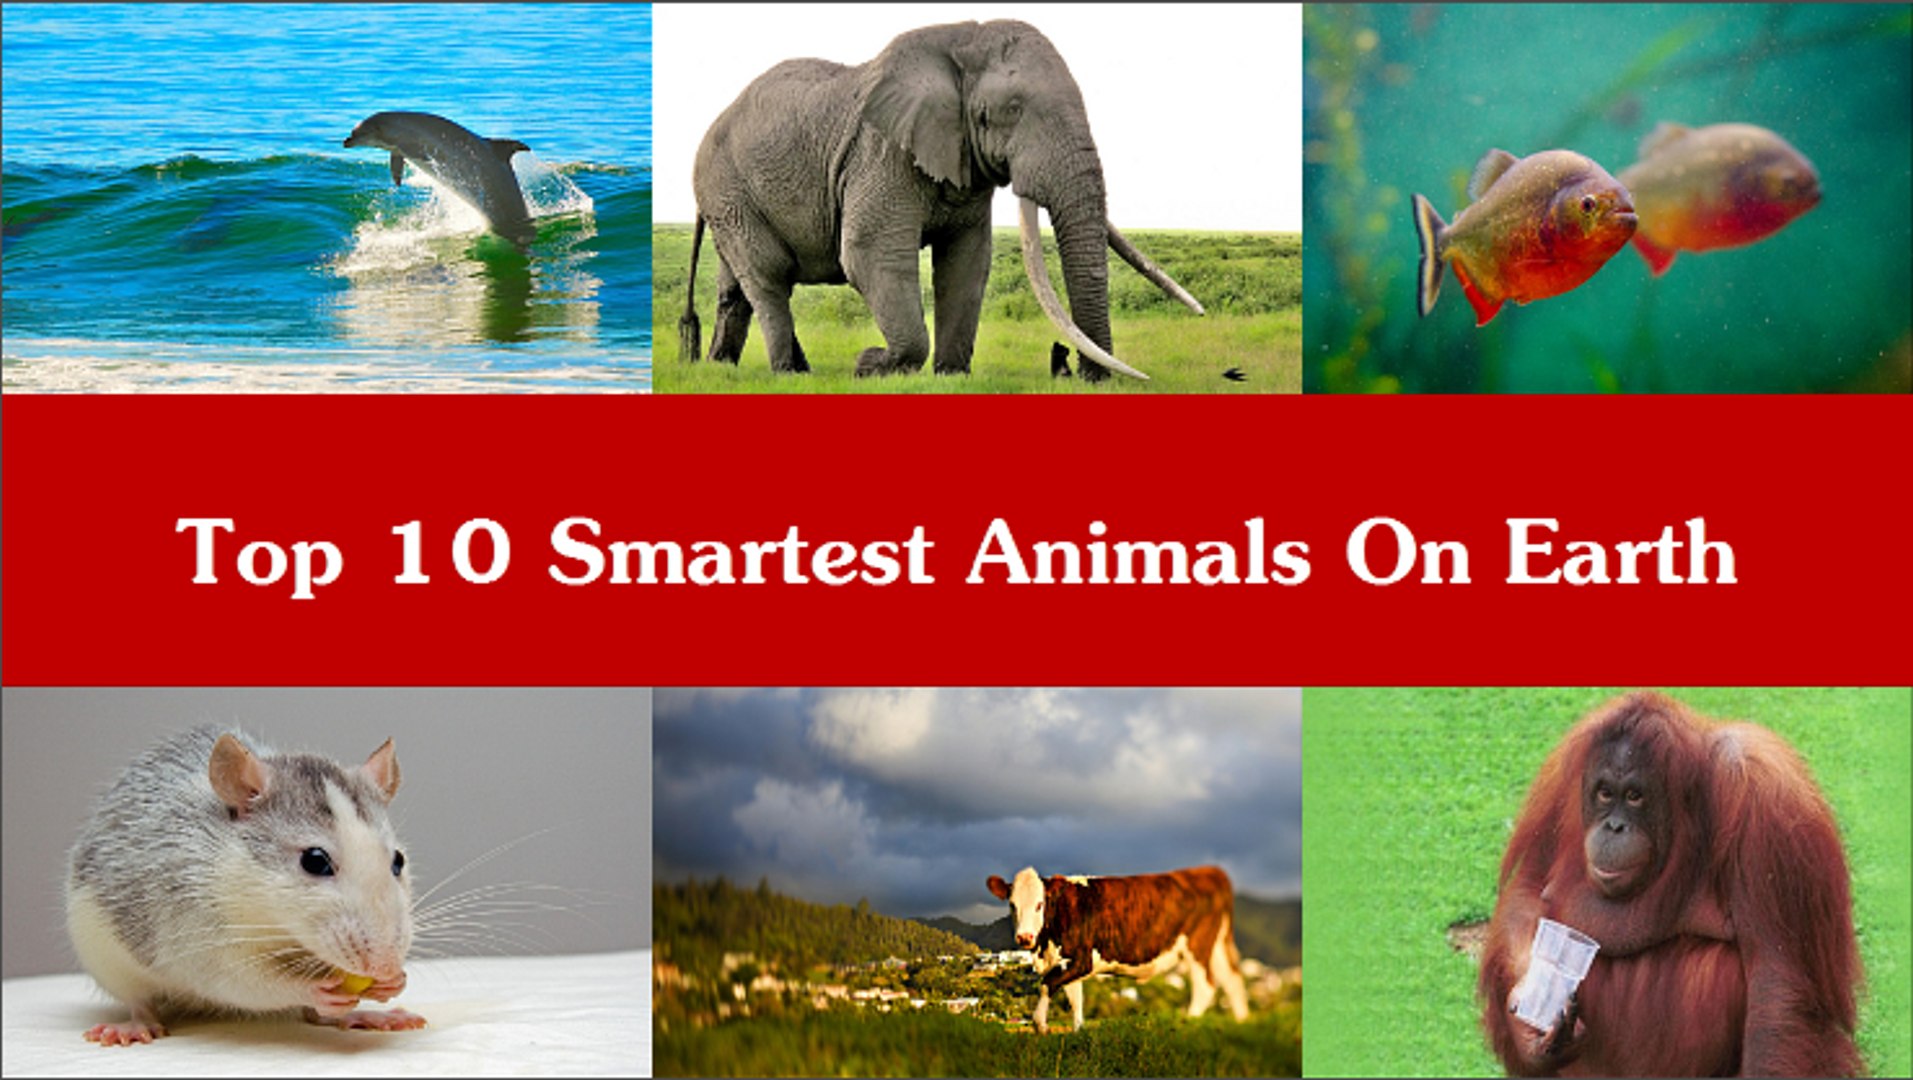 Meet These 10 Smartest Animals in the World